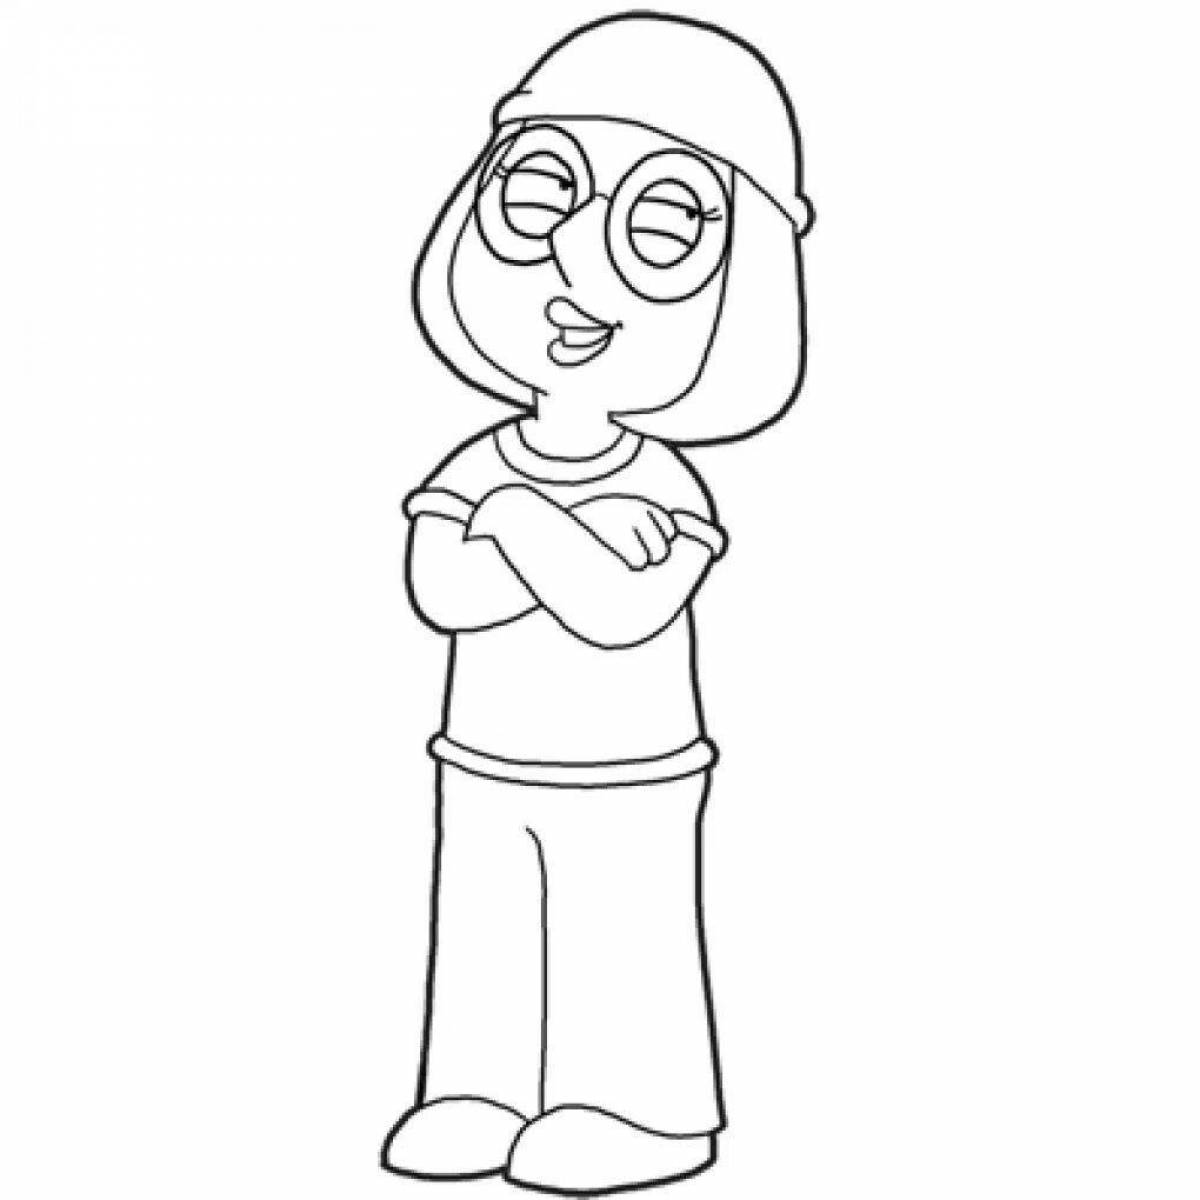 Animated Family Guy Coloring Page